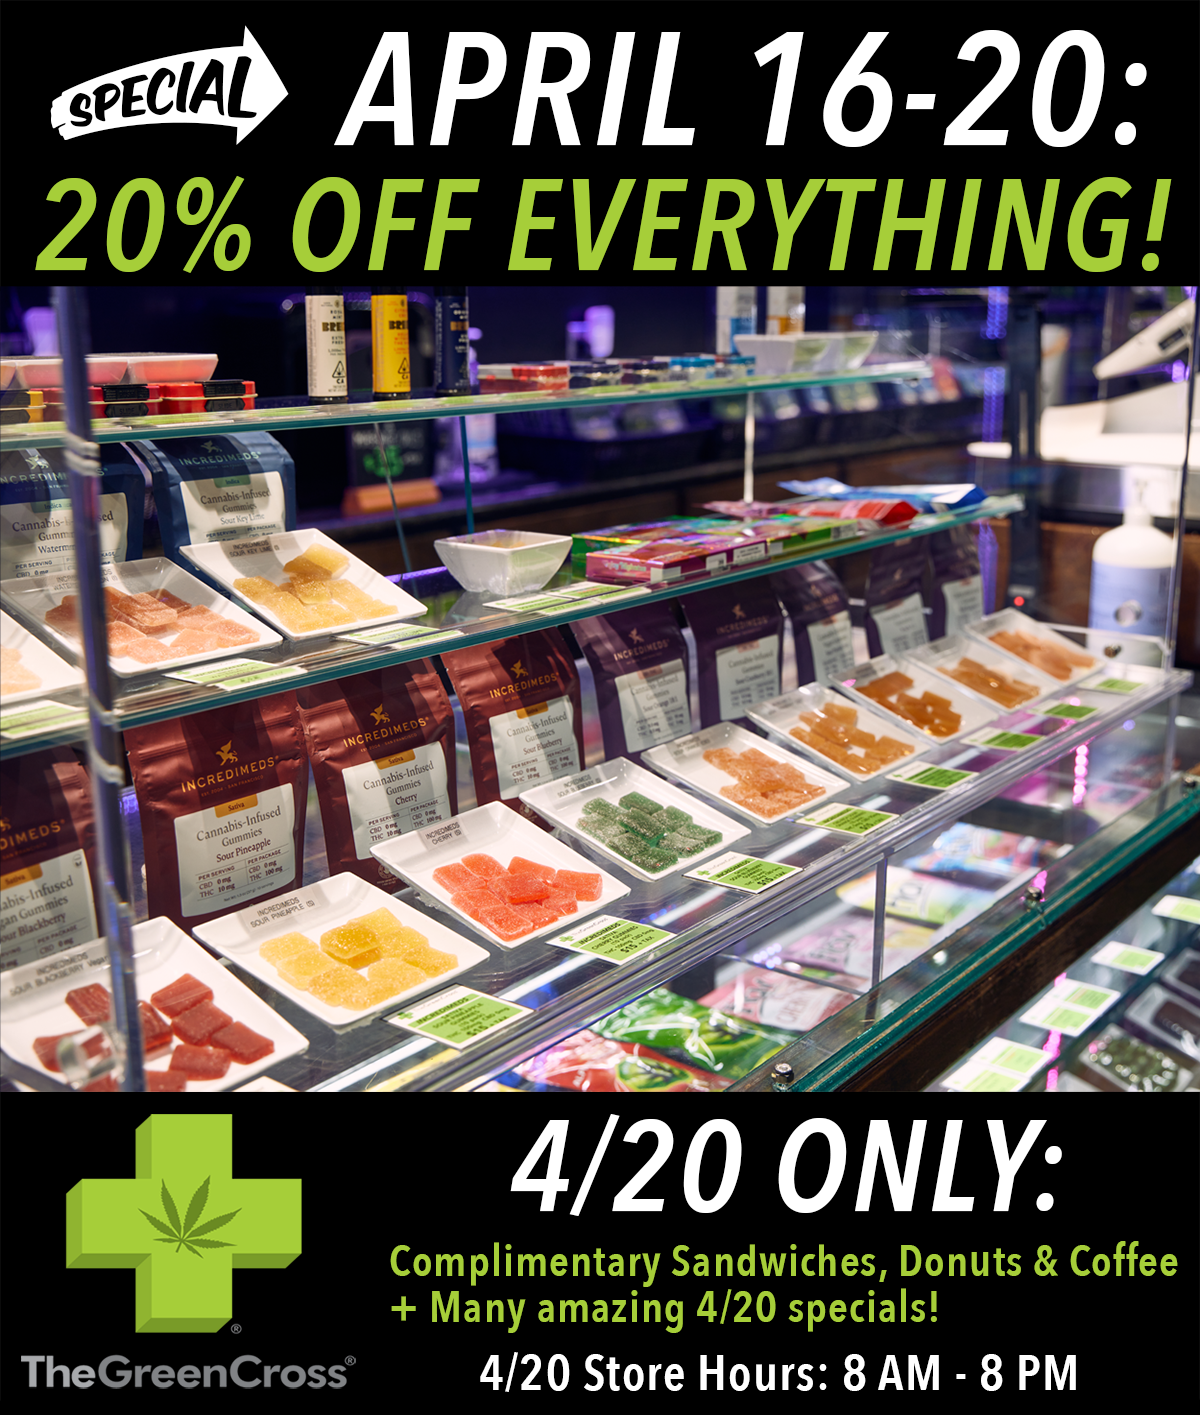 April 16-20: 20% Off EVERYTHING